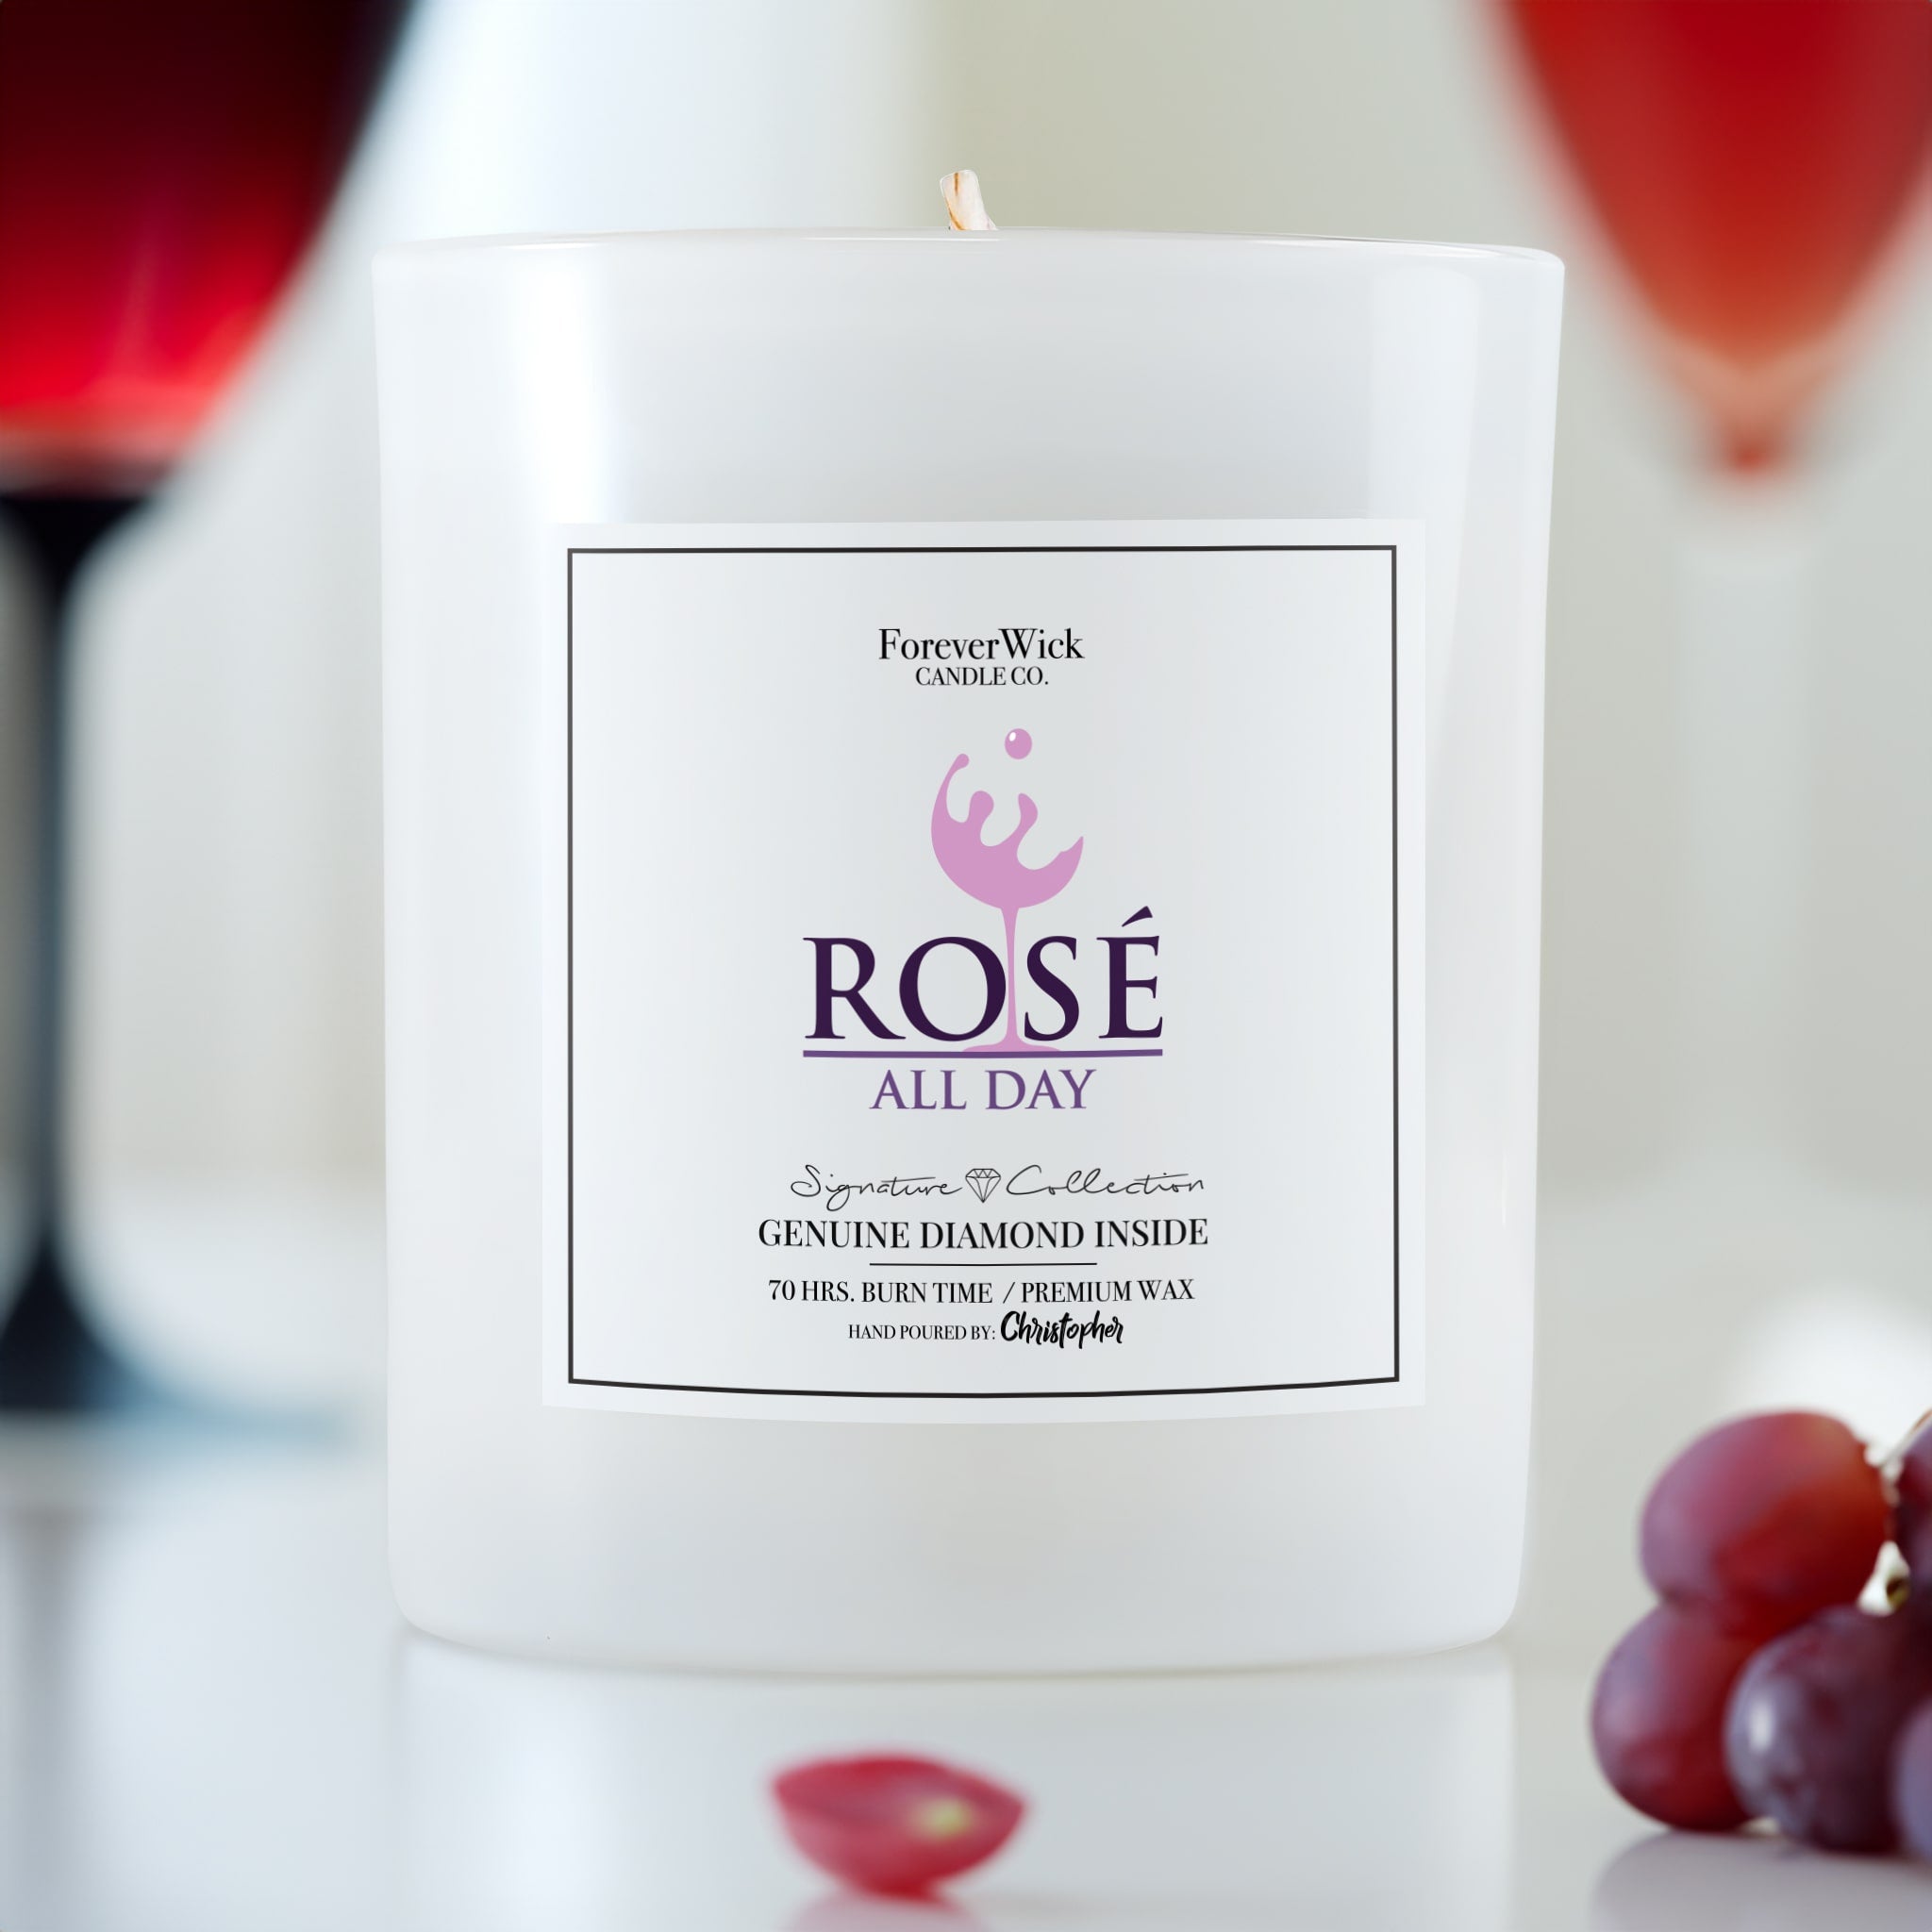 Rosè All Day Diamond Candle